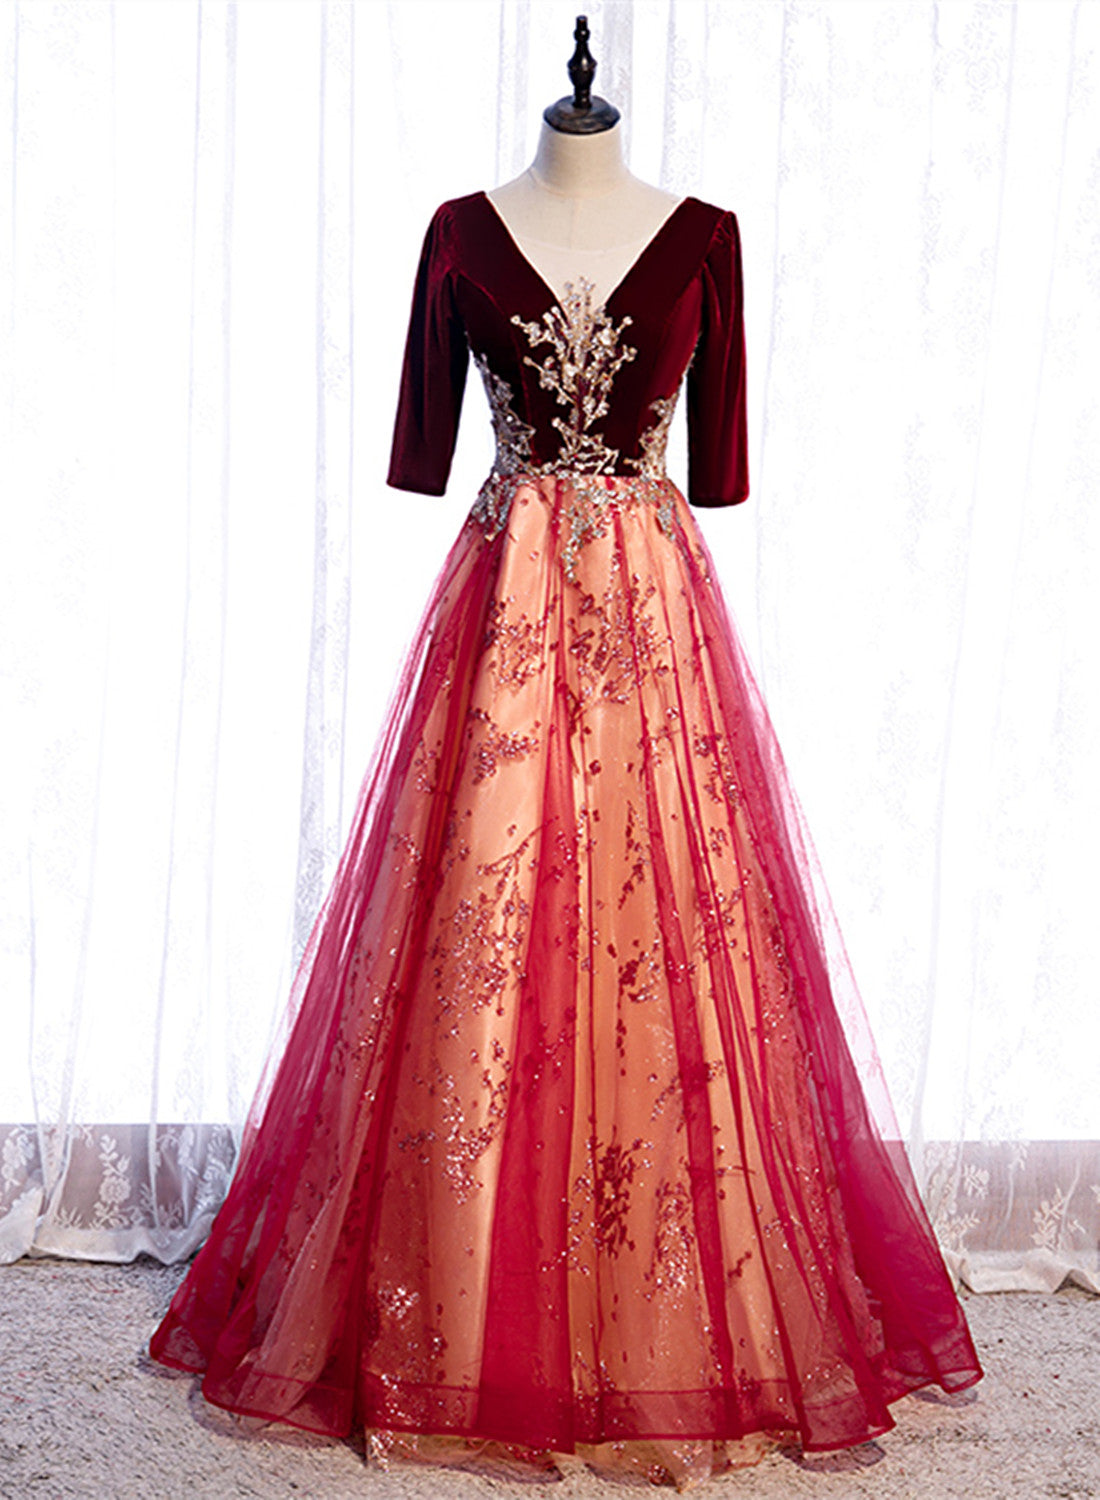 Wine Red Velvet 1/2 Sleeves Long Party Dress with Lace, A-line Junior Corset Prom Dress outfits, Formal Dresses Outfit